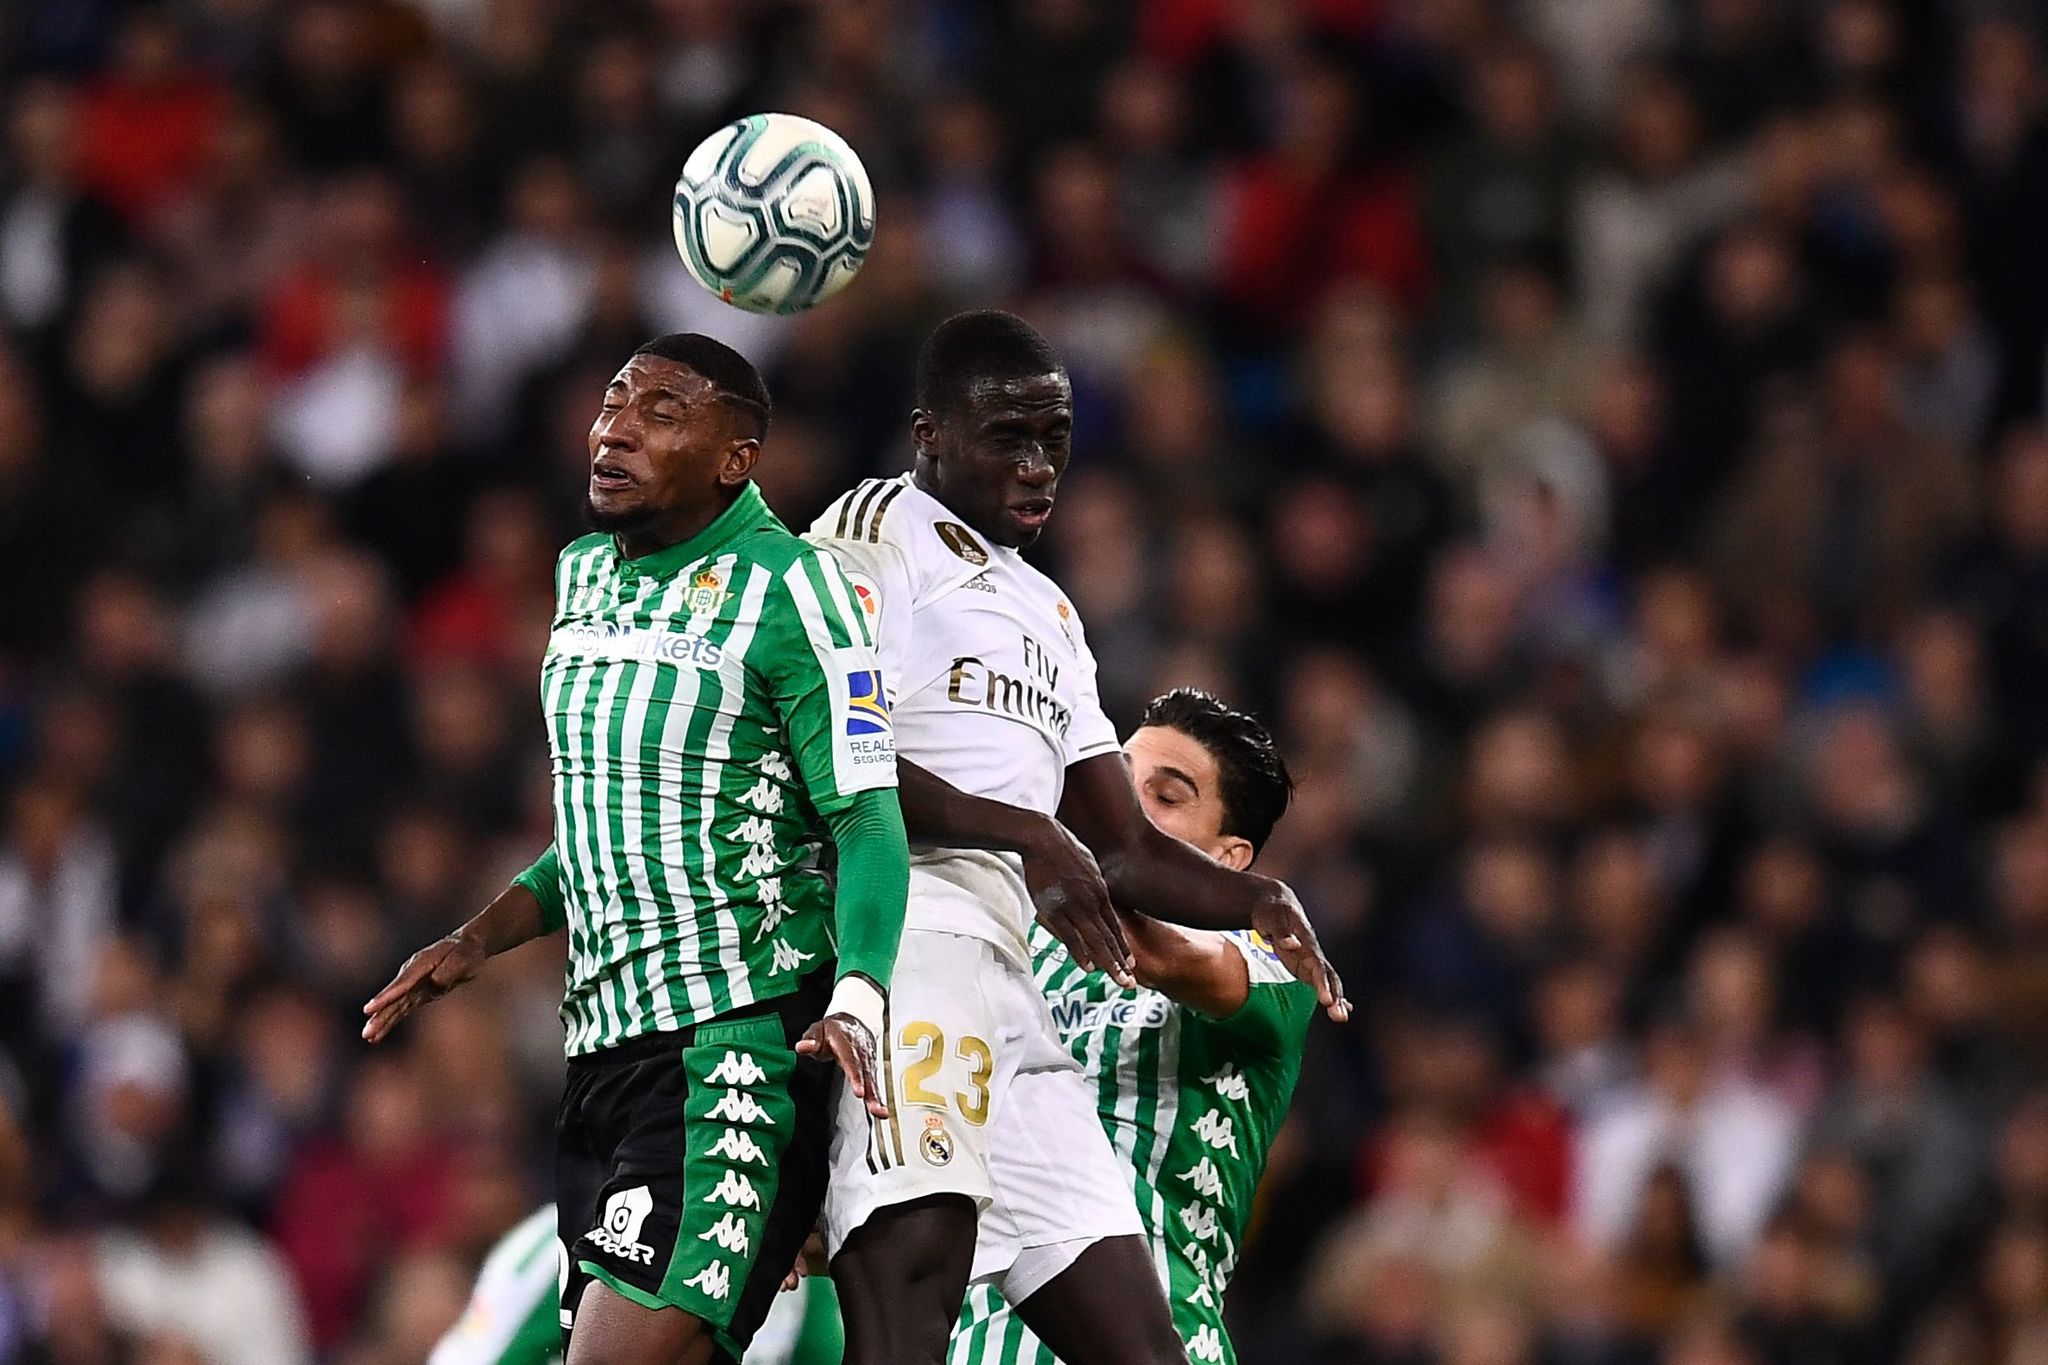 TOPSHOT - Real <HIT>Betis</HIT> Brazilian defender Emerson Aparecido (L) heads the ball next to Real <HIT>Betis</HIT> Algerian defender Aissa Mandi (C) during the Spanish League football match between Real Madrid CF and Real <HIT>Betis</HIT> at the Santiago <HIT>Bernabeu</HIT> stadium in Madrid, on November 2, 2019. (Photo by OSCAR DEL POZO / AFP)